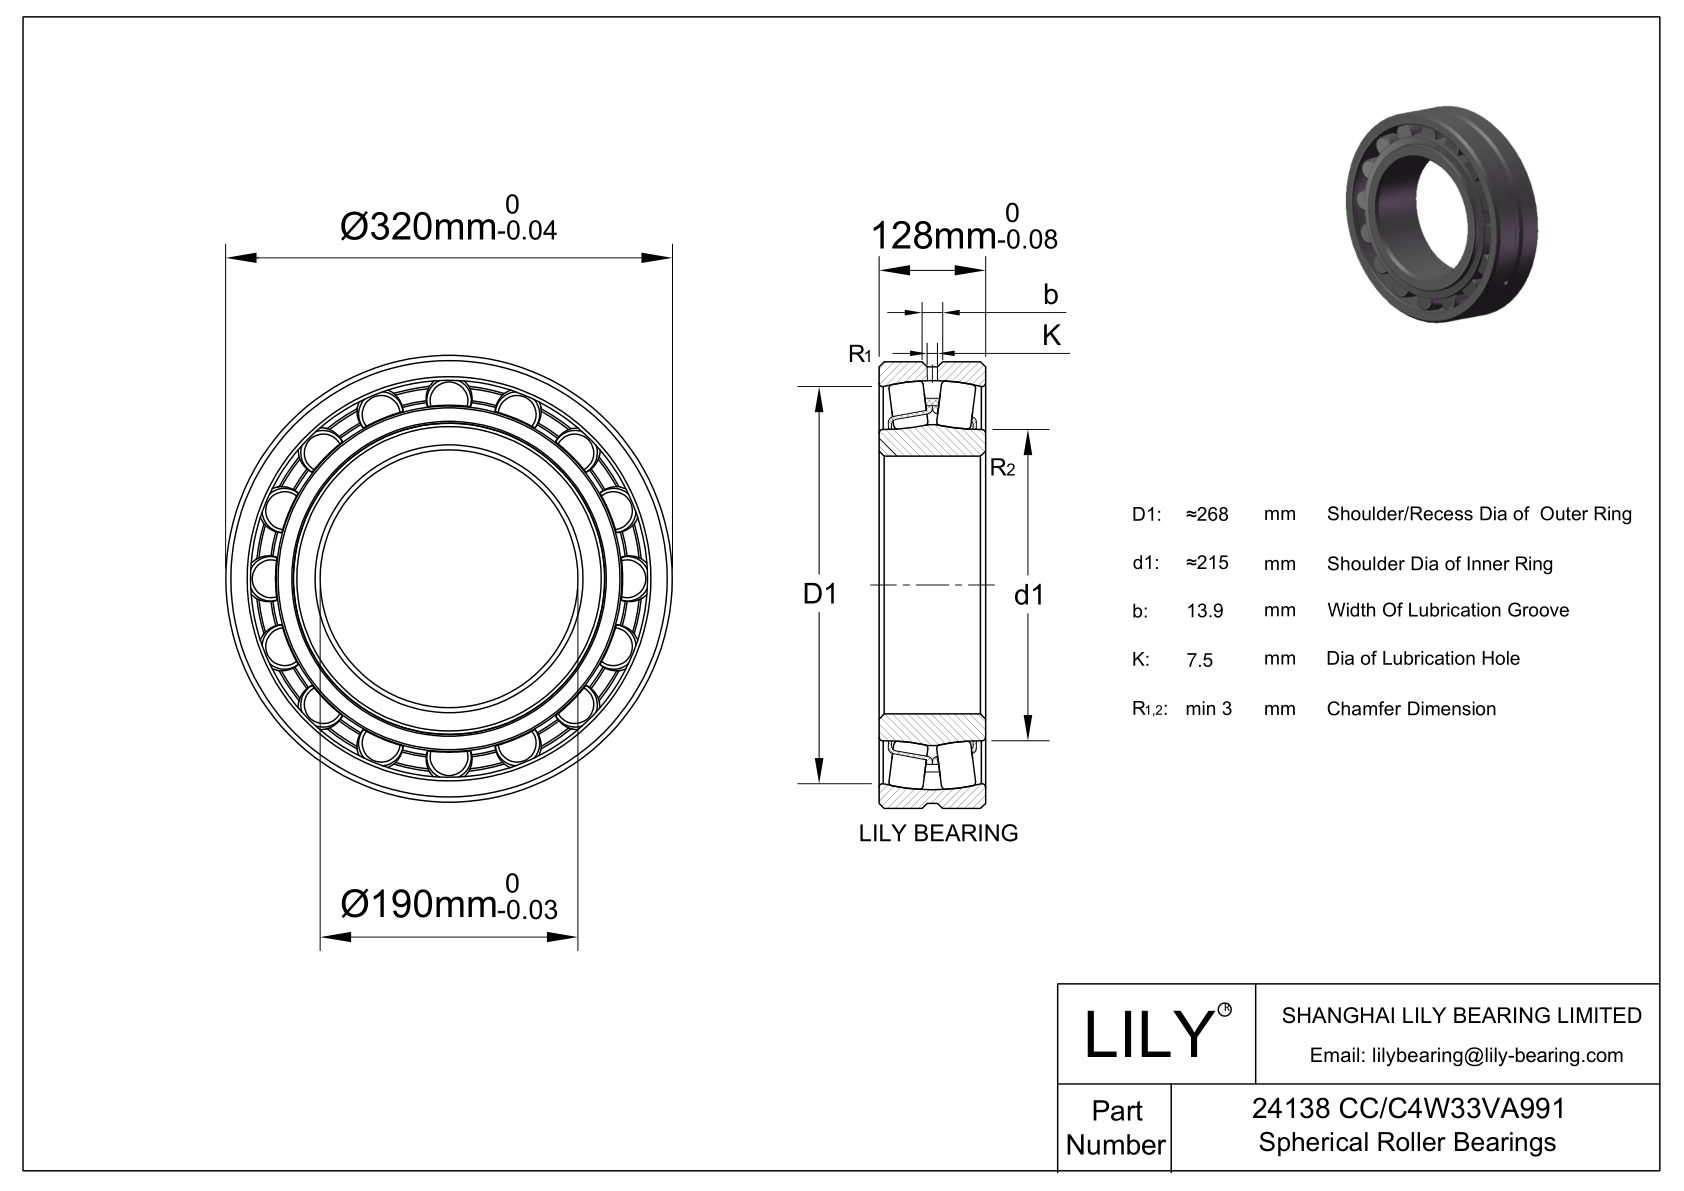 24138 CC/C4W33VA991 Double Row Spherical Roller Bearing cad drawing